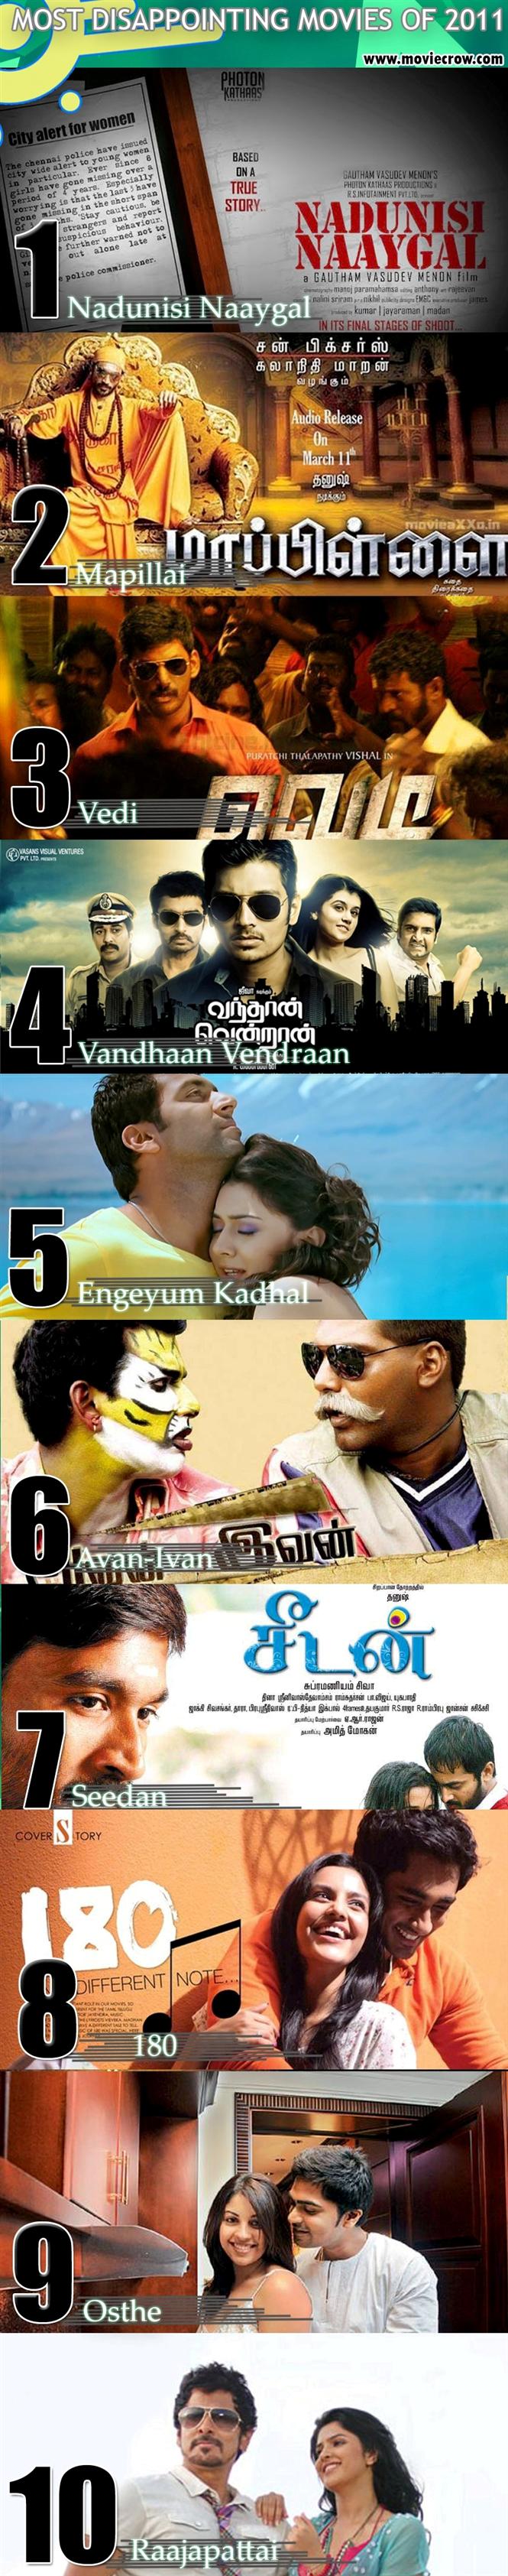 Disappointing Tamil Movies of 2011